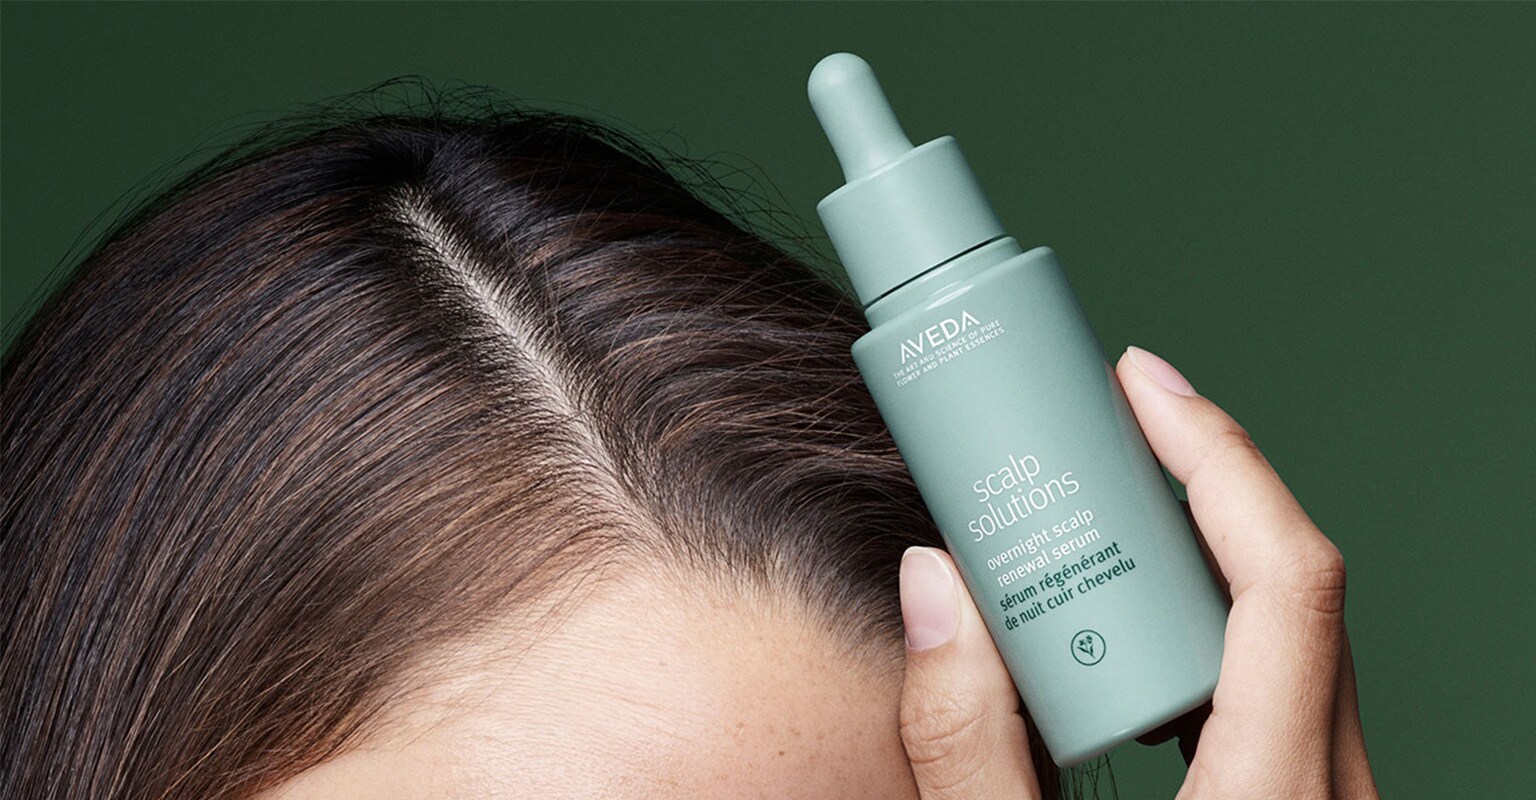 Shop Aveda's scalp solutions overnight scalp renewal serum improving scalp hydration by 51% in one night.